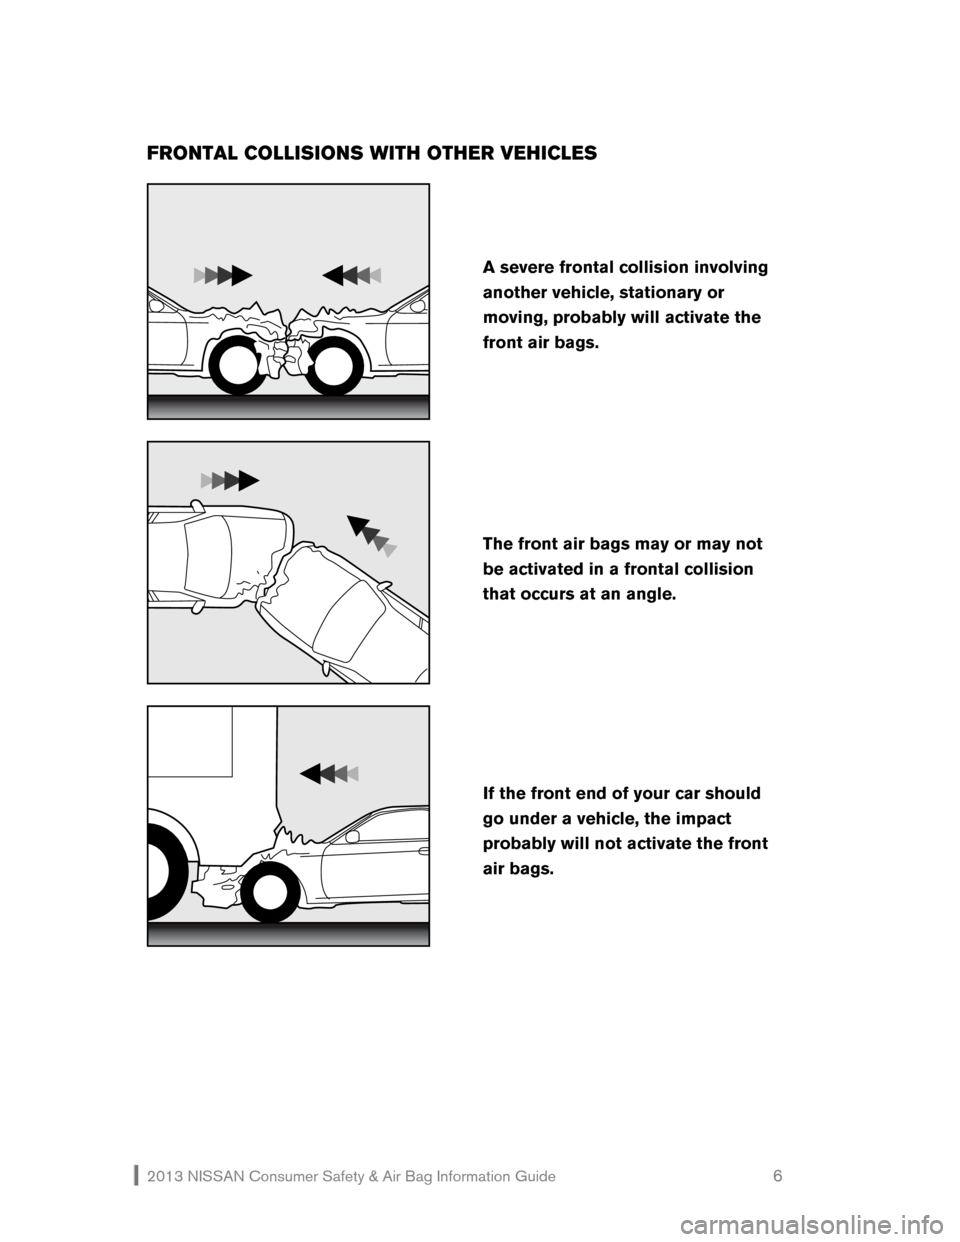 NISSAN FRONTIER 2013 D40 / 2.G Consumer Safety Air Bag Information Guide 2013 NISSAN Consumer Safety & Air Bag Information Guide                                                   6 
FRONTAL COLLISIONS WITH OTHER VEHICLES 
 
 
 
 
If the front end of your car should 
go und